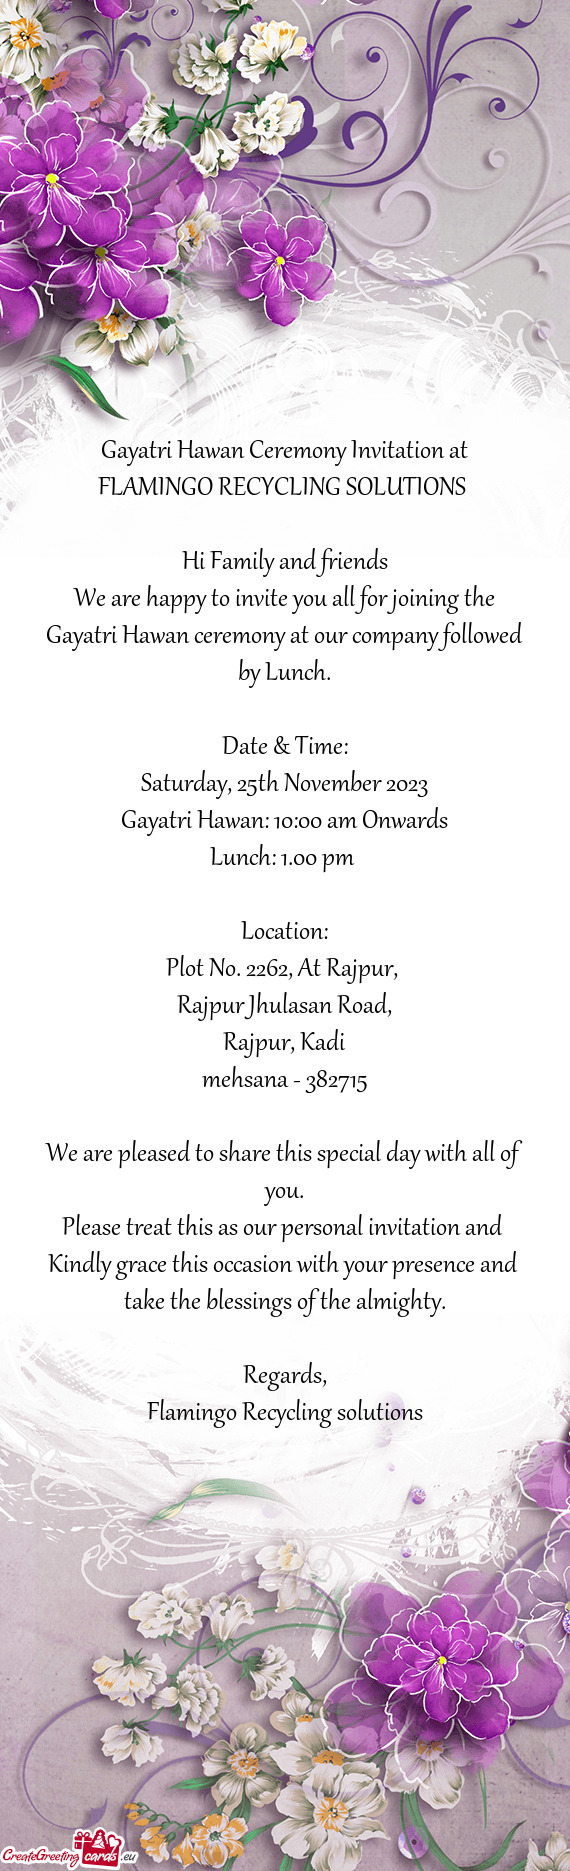 Gayatri Hawan ceremony at our company followed by Lunch